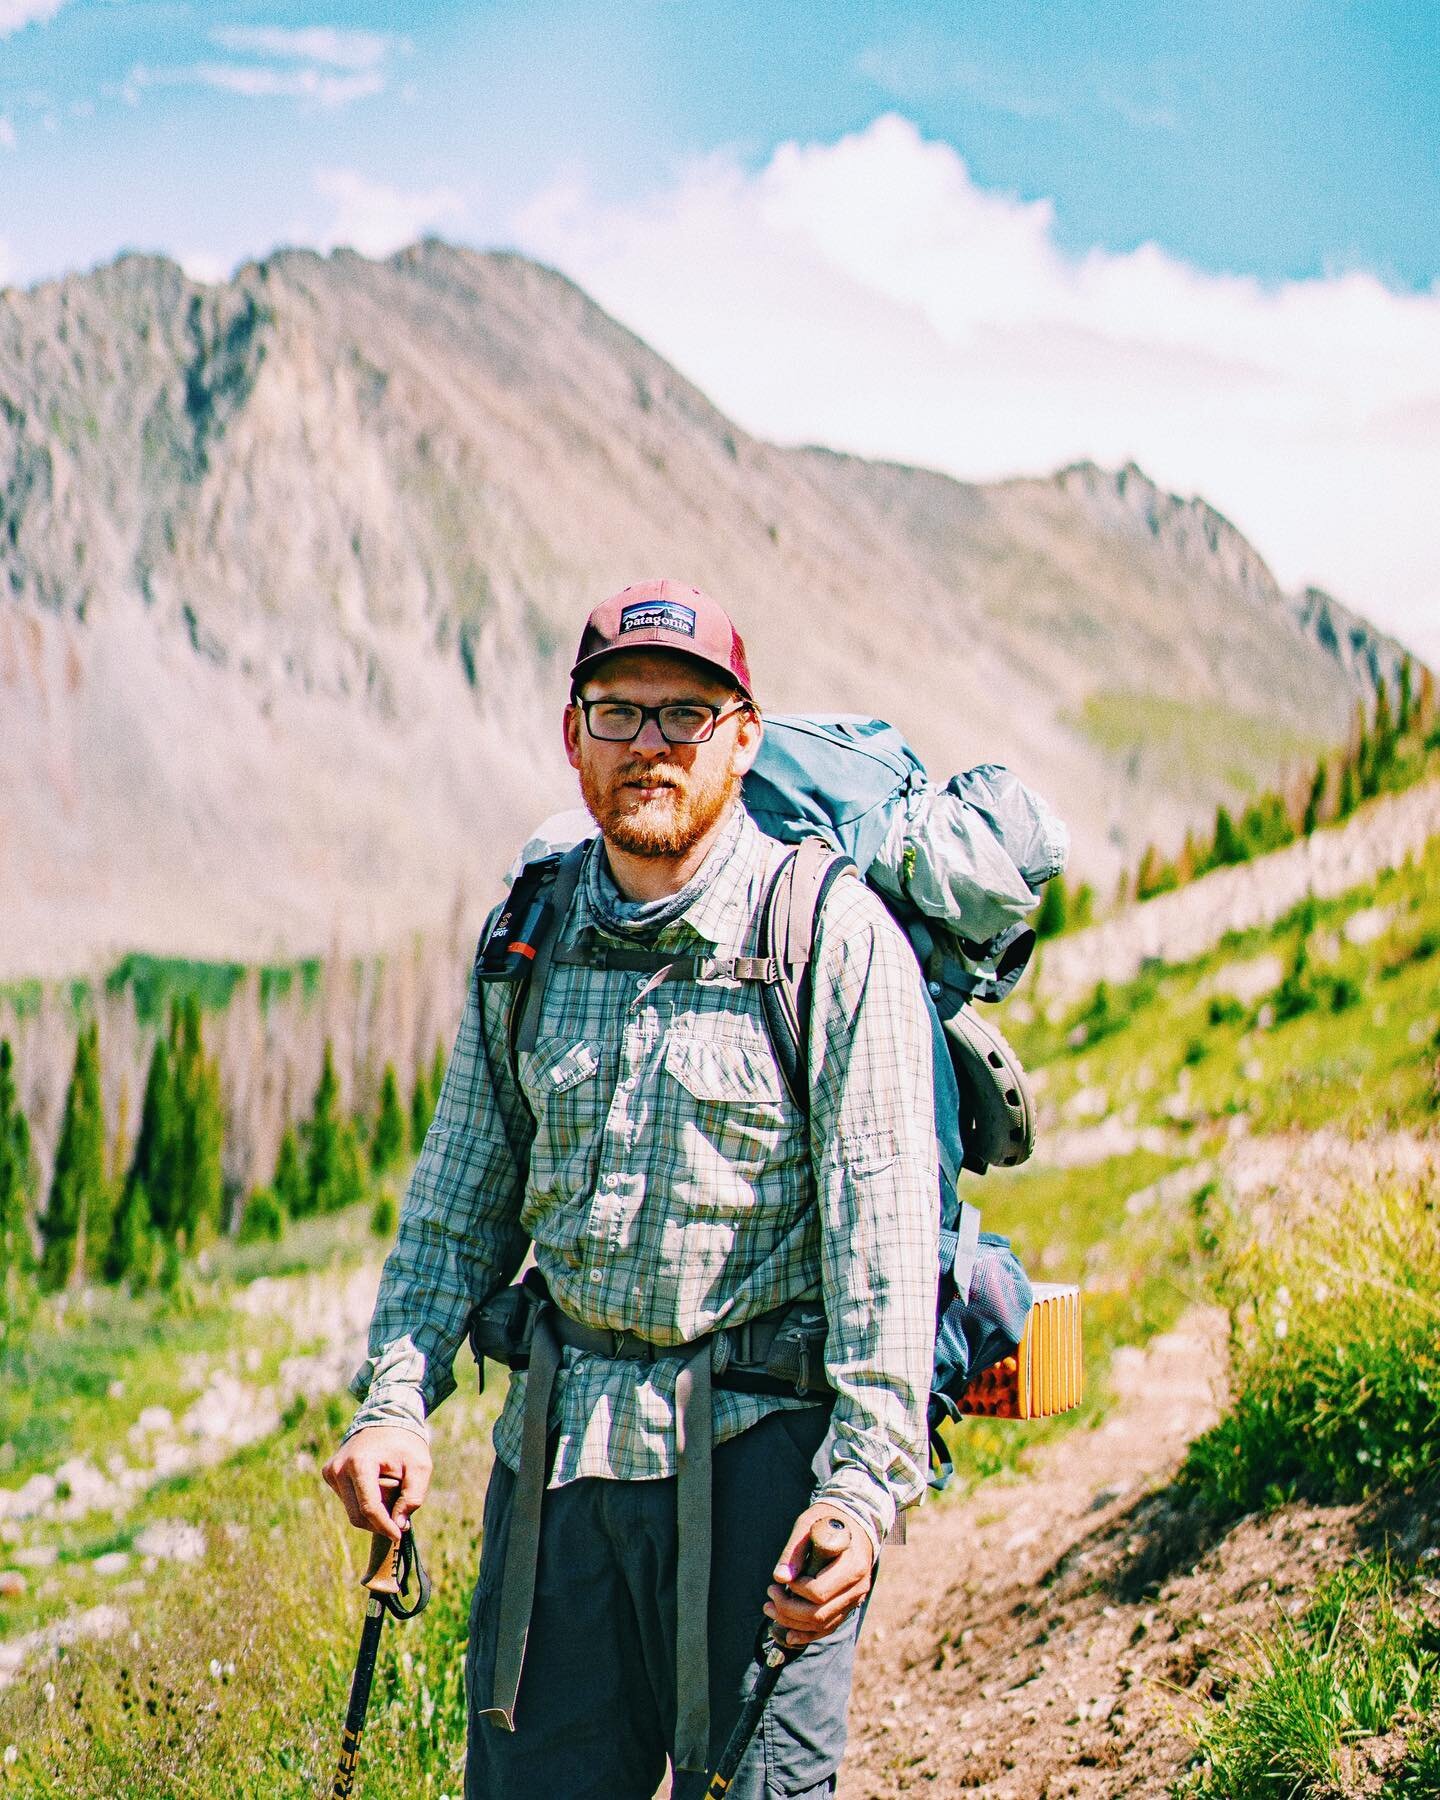 15 miles a day for just two days was one of the most physically demanding things I&rsquo;ve done in a while, but for @rmoels , that&rsquo;s been his life every day for the past 3 weeks. He&rsquo;s nearing the end of an almost 500 mile journey hiking 